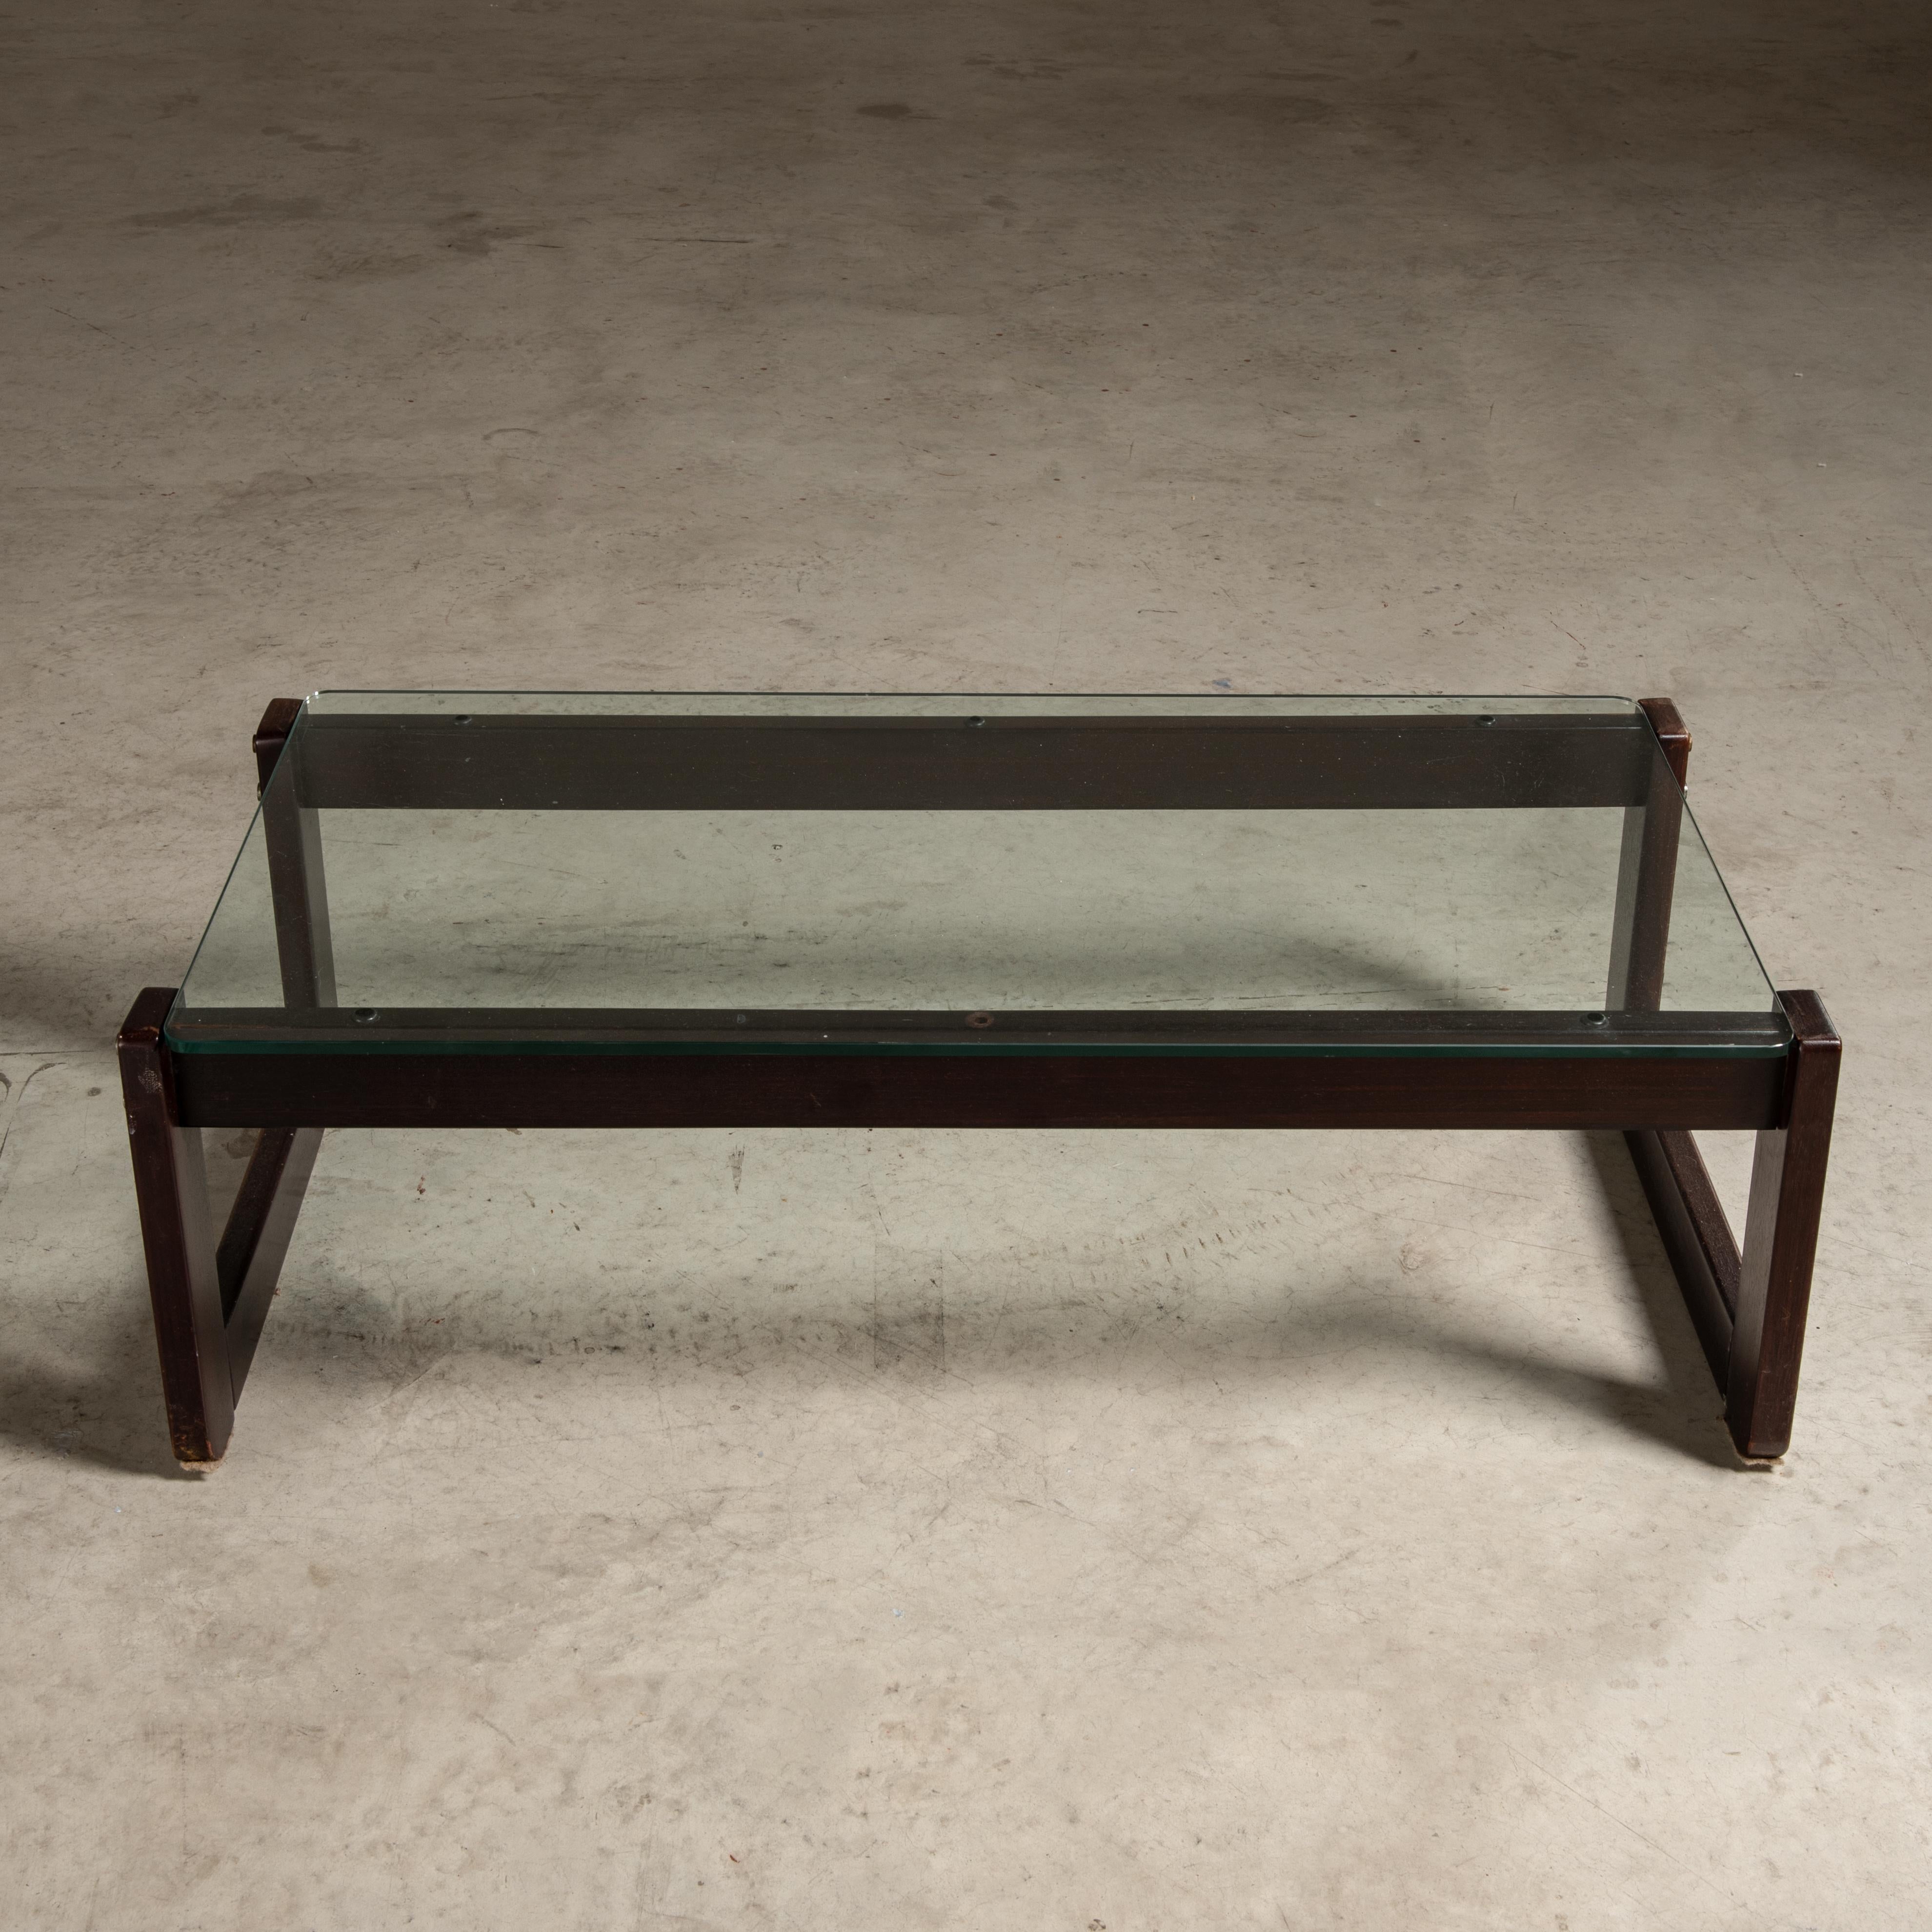 'MP-105' Coffee Table, by Percival Lafer, Brazilian Mid-Century Modern For Sale 2